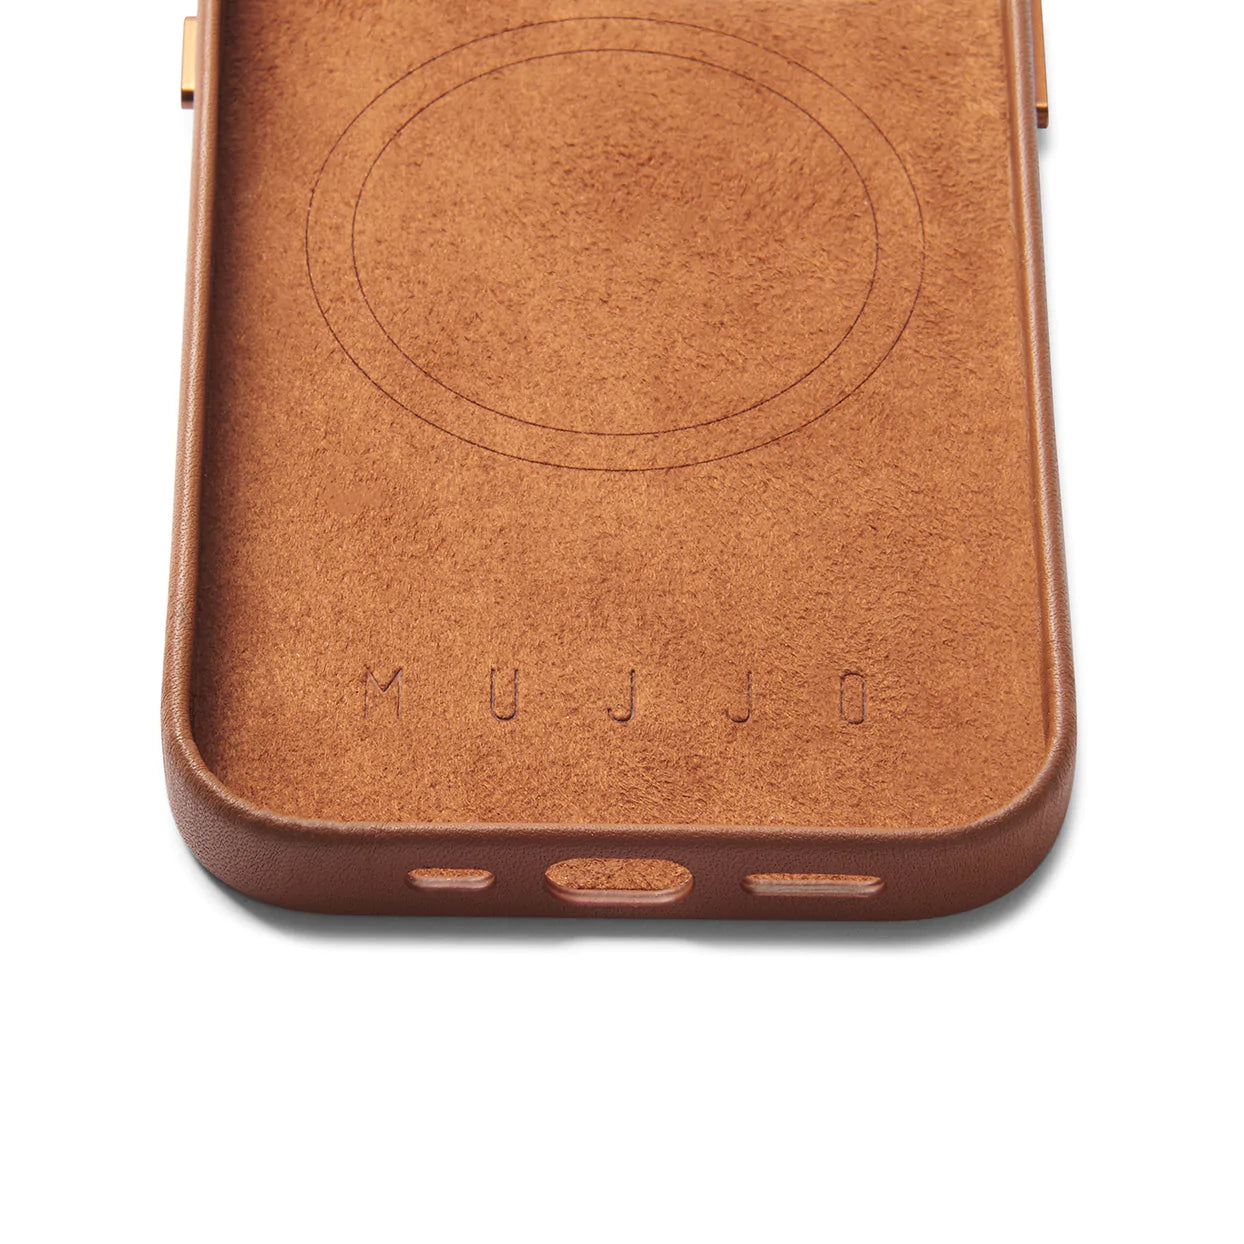 Mujjo Full Leather Case for iPhone 14 (Magsafe)